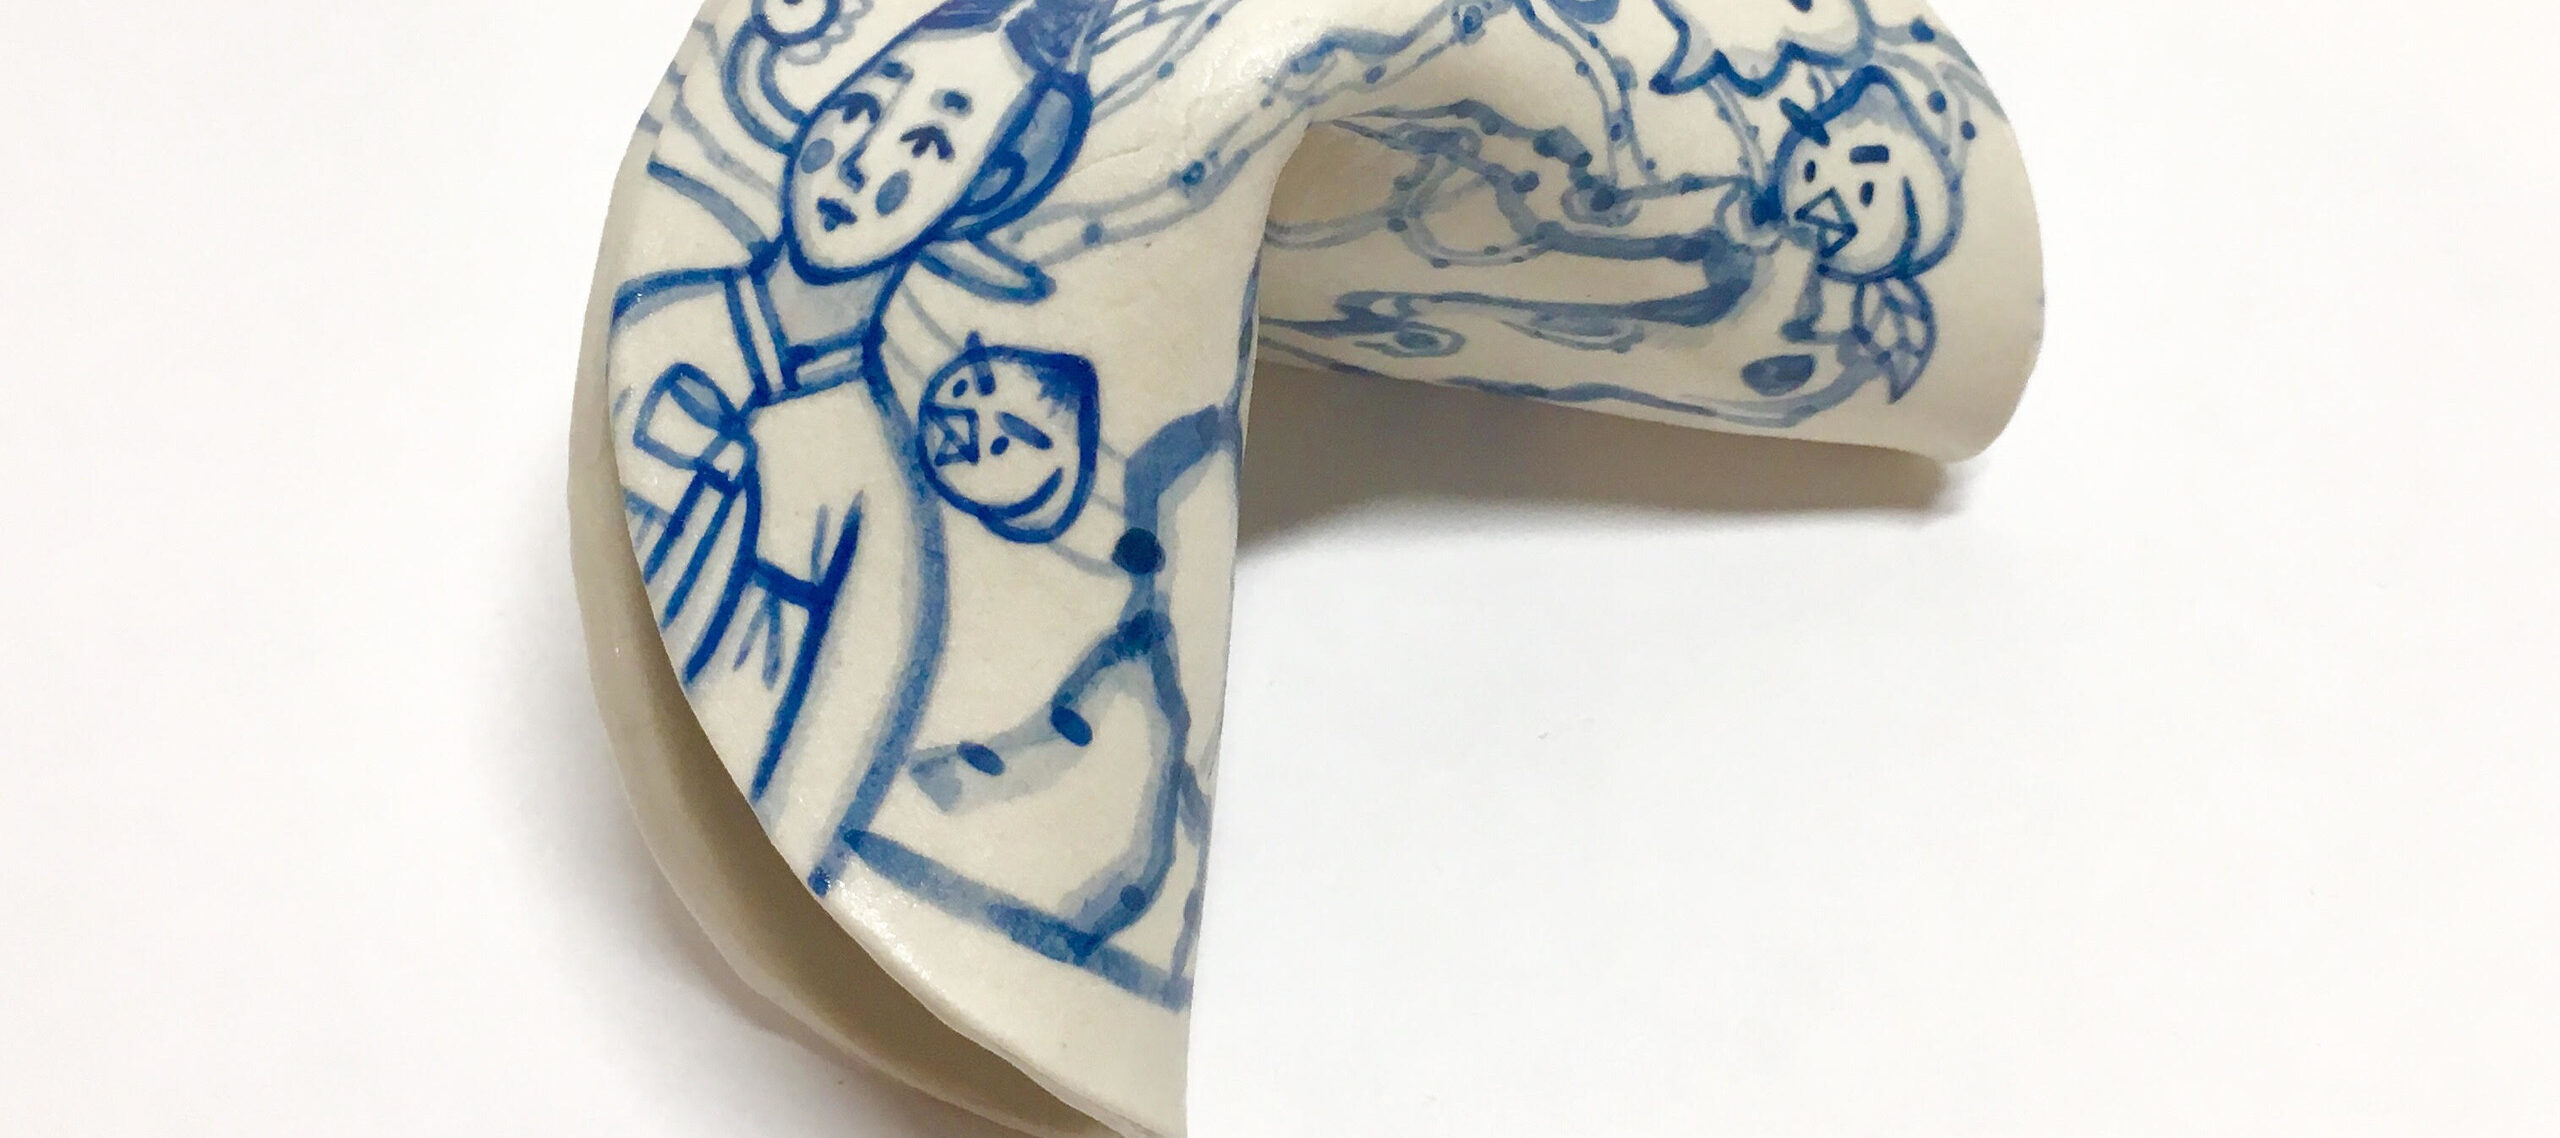 A blue and white painted porcelain fortune cookie depicting a woman in a hanbok standing in a garden of tall trees dotted with large peaches with faces and beaks on them. On the cookie’s edge is a red stamp with the artist’s name.